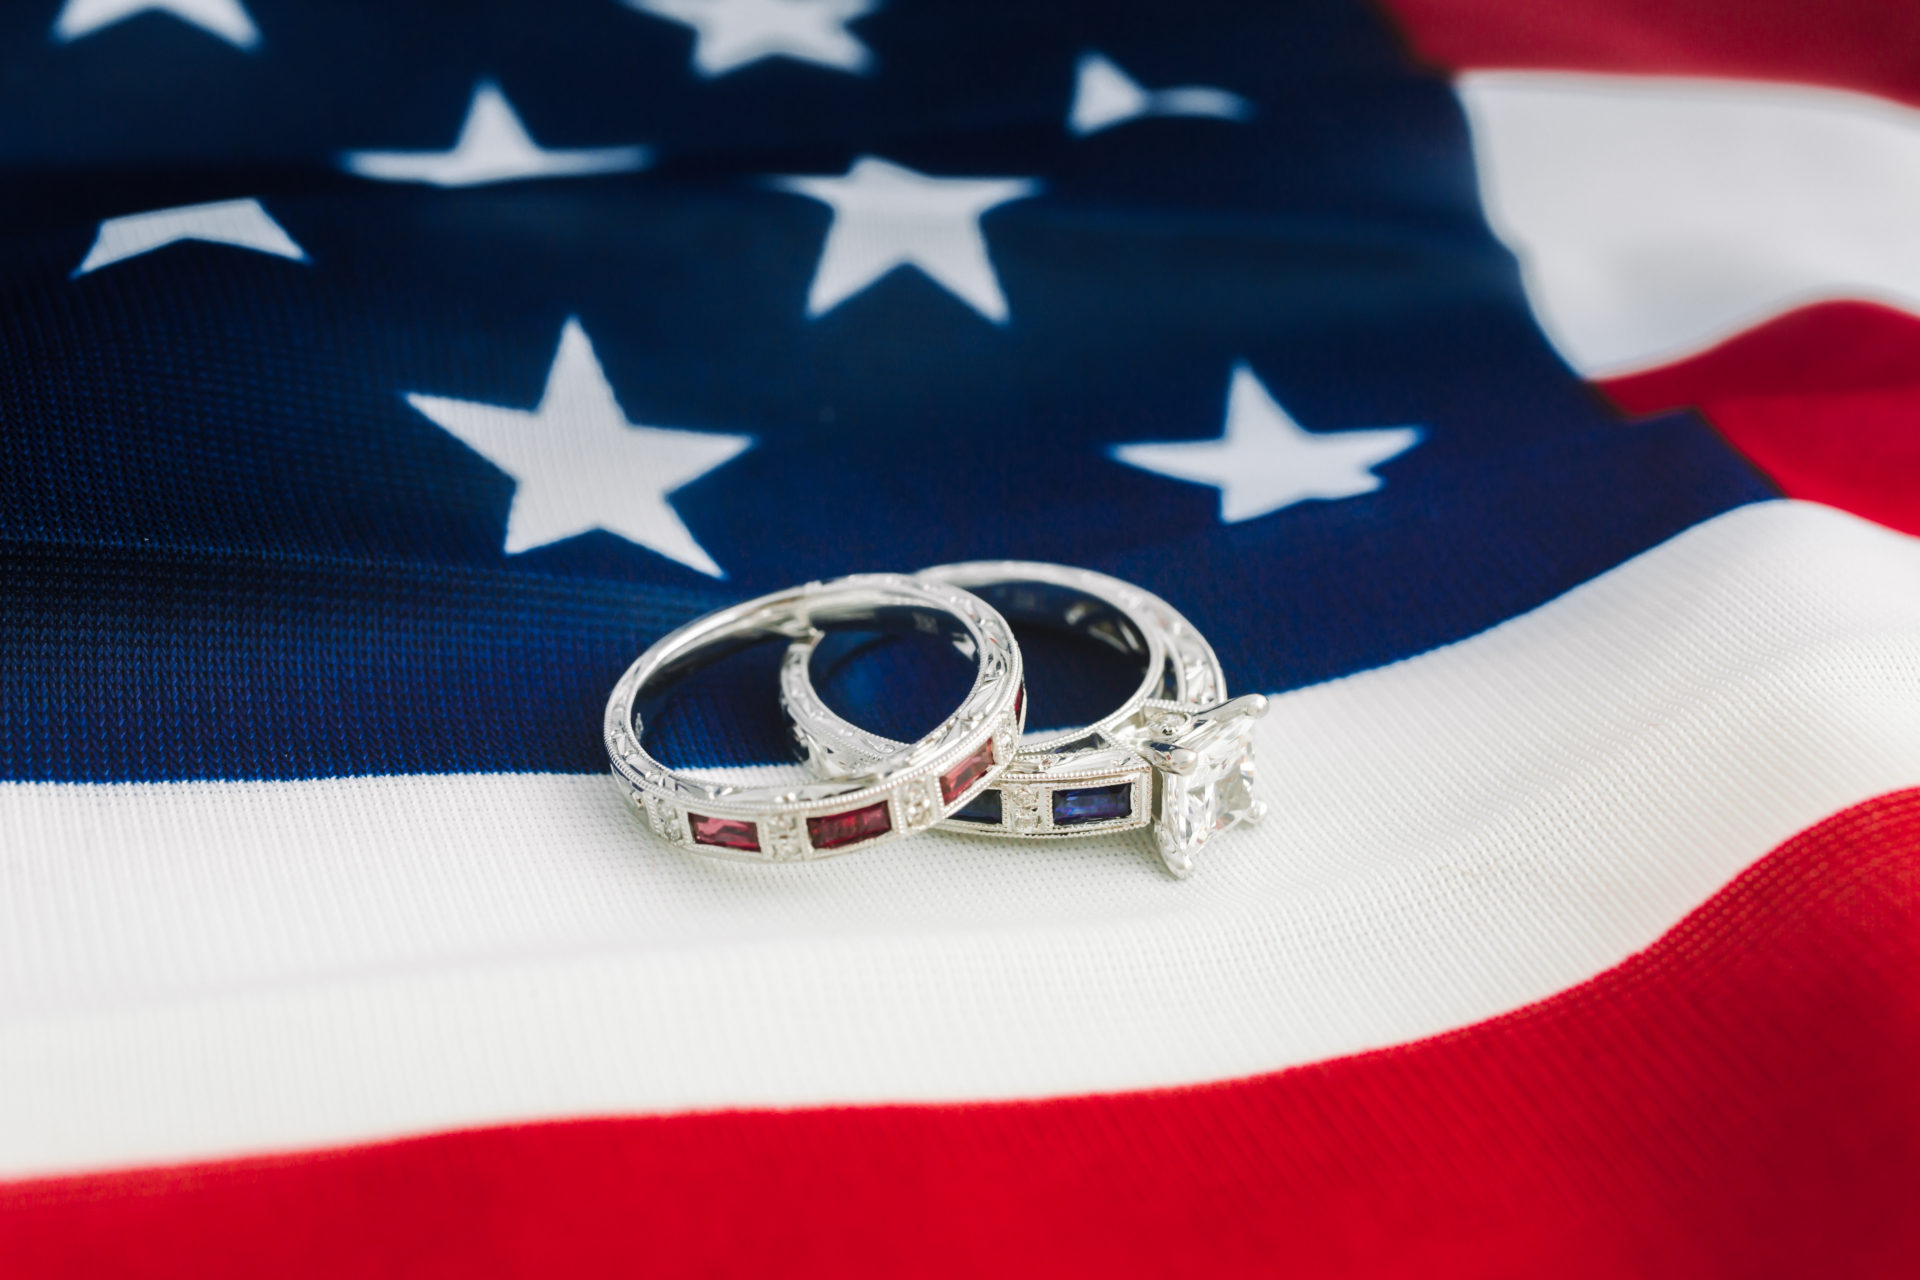 White gold engagement ring with sapphires and diamonds with white gold wedding band with rubies on American flag